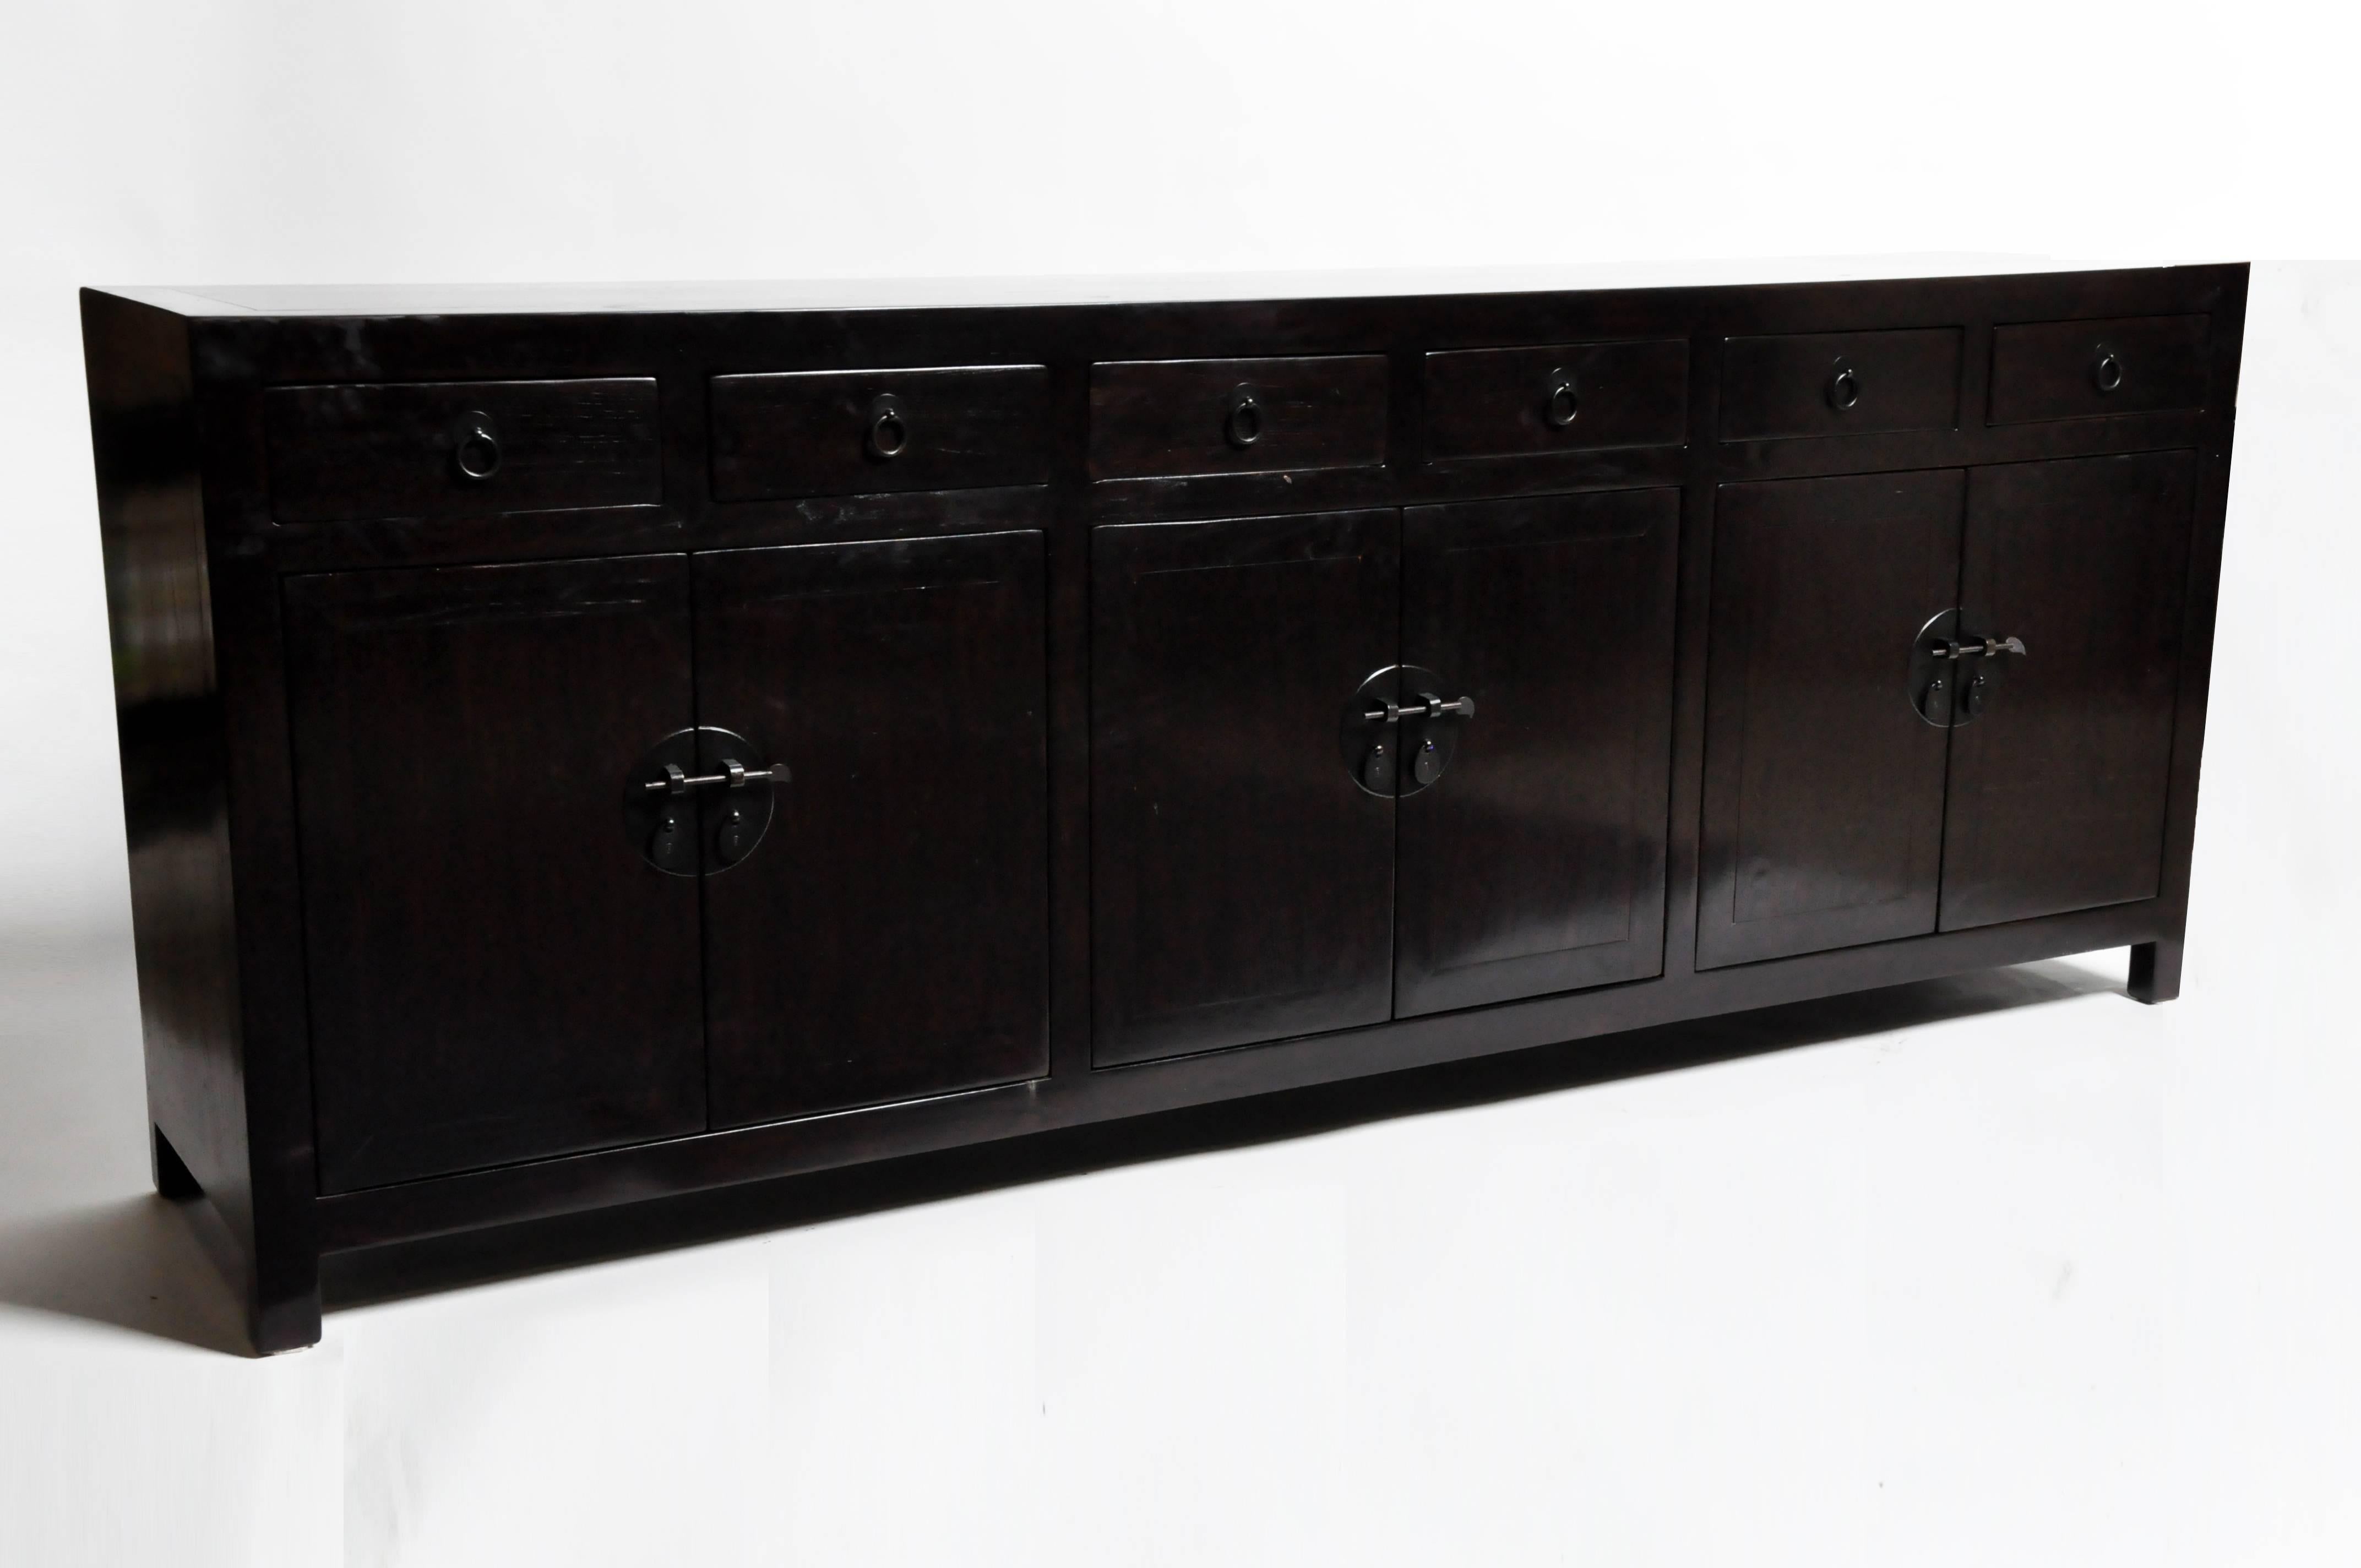 This sideboard is from Henan, China and was made from reclaimed elm wood. The features mortise and tenon joinery, six drawers, and three shelves below for ample storage. You can also customize a new one and make it your own. Wood, color, finish, and